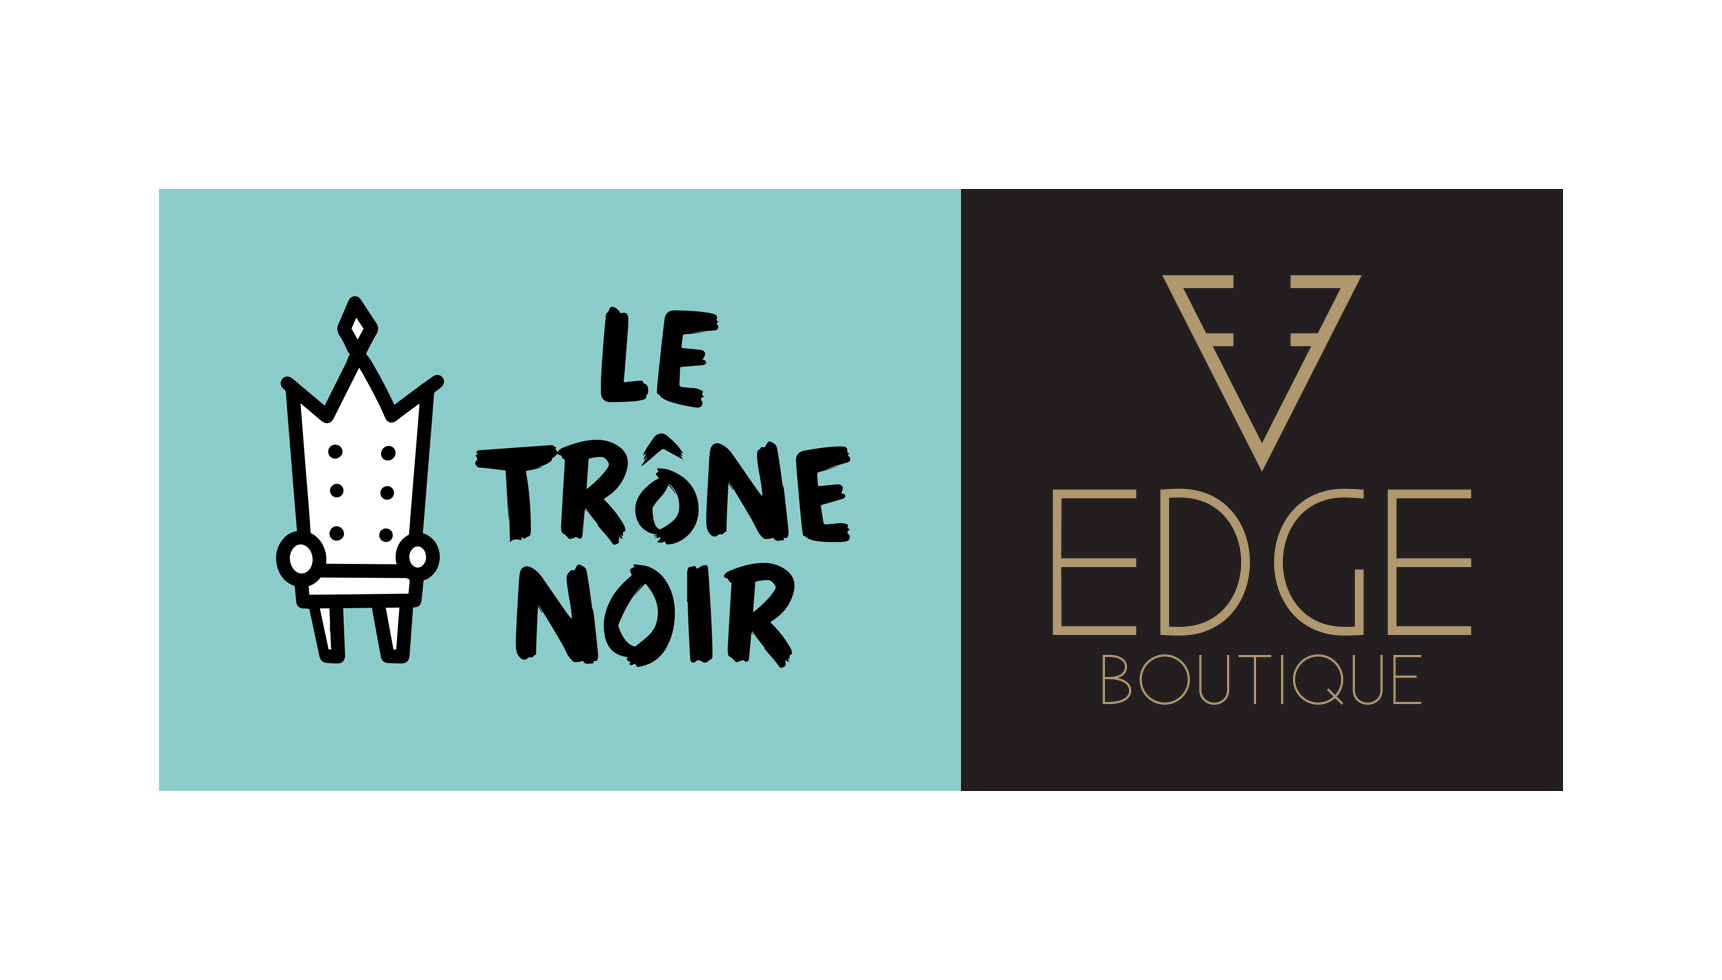 <strong>Η Le Trône Noir σε συνεργασία με την Edge Boutique διοργανώνουν το πρώτο τους φιλανθρωπικό fashion show</strong>